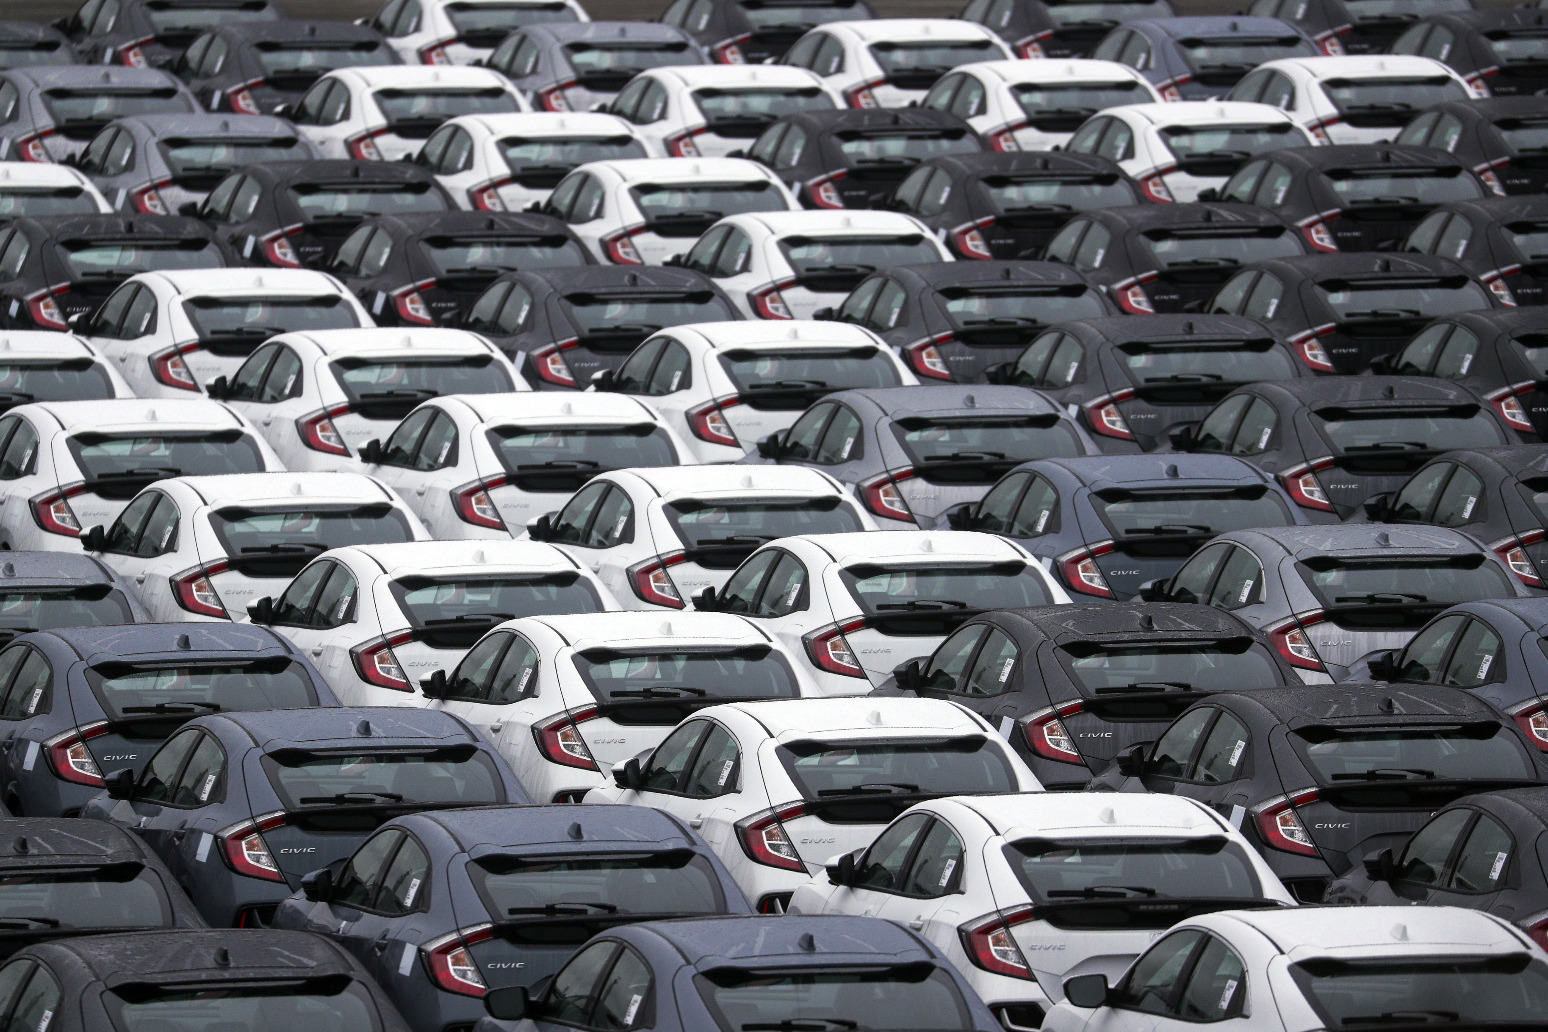 Demand for new cars by private buyers declined in June 